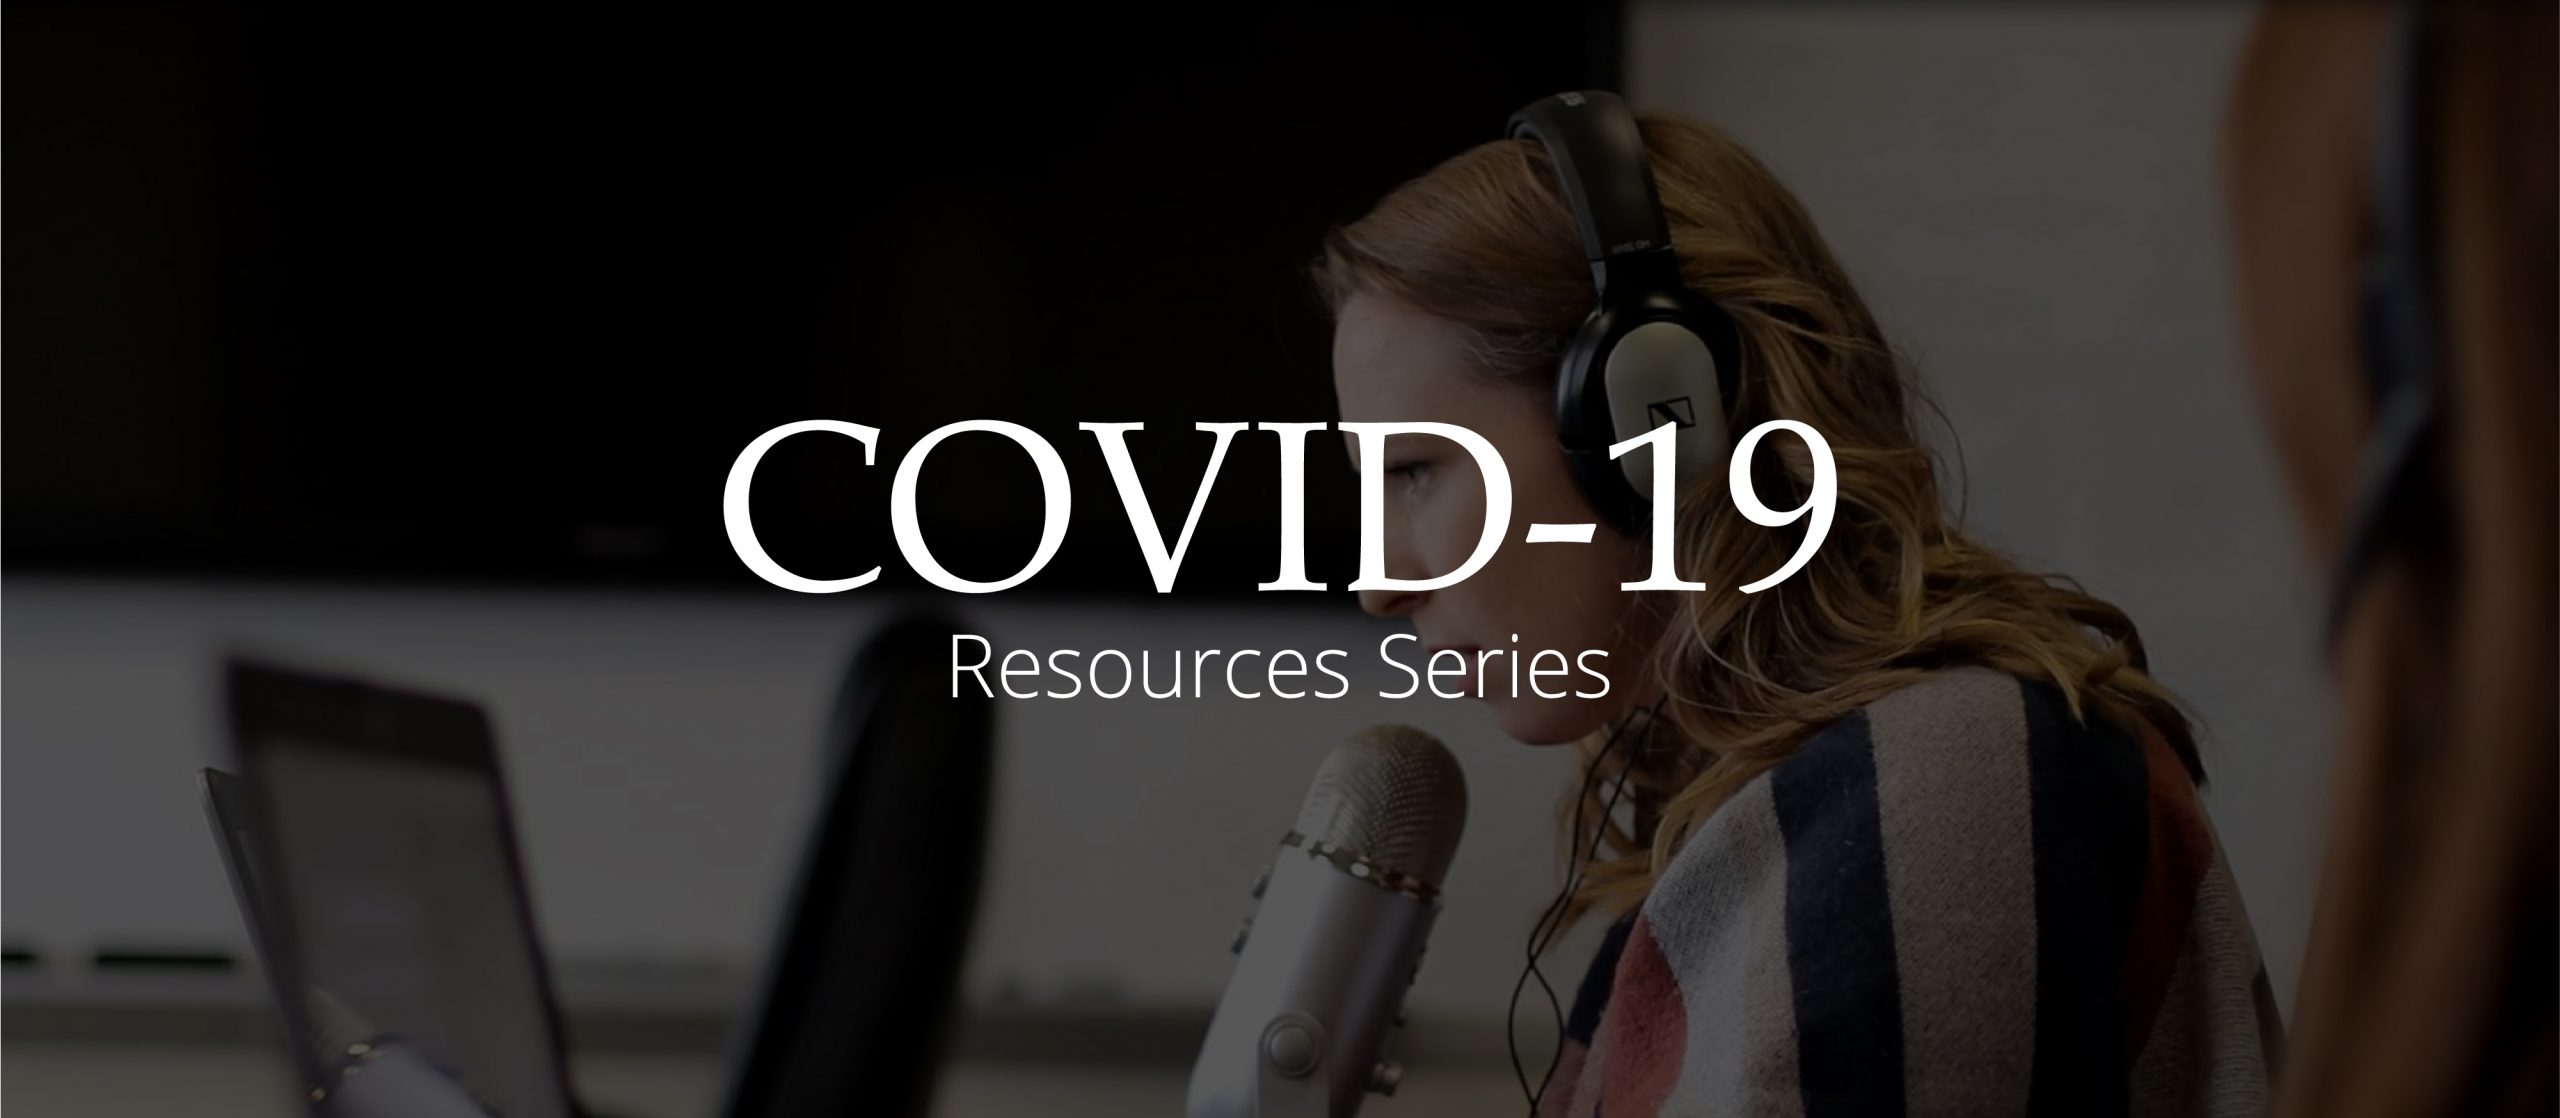 COVID-19: How to Prepare Your Library for the Unexpected